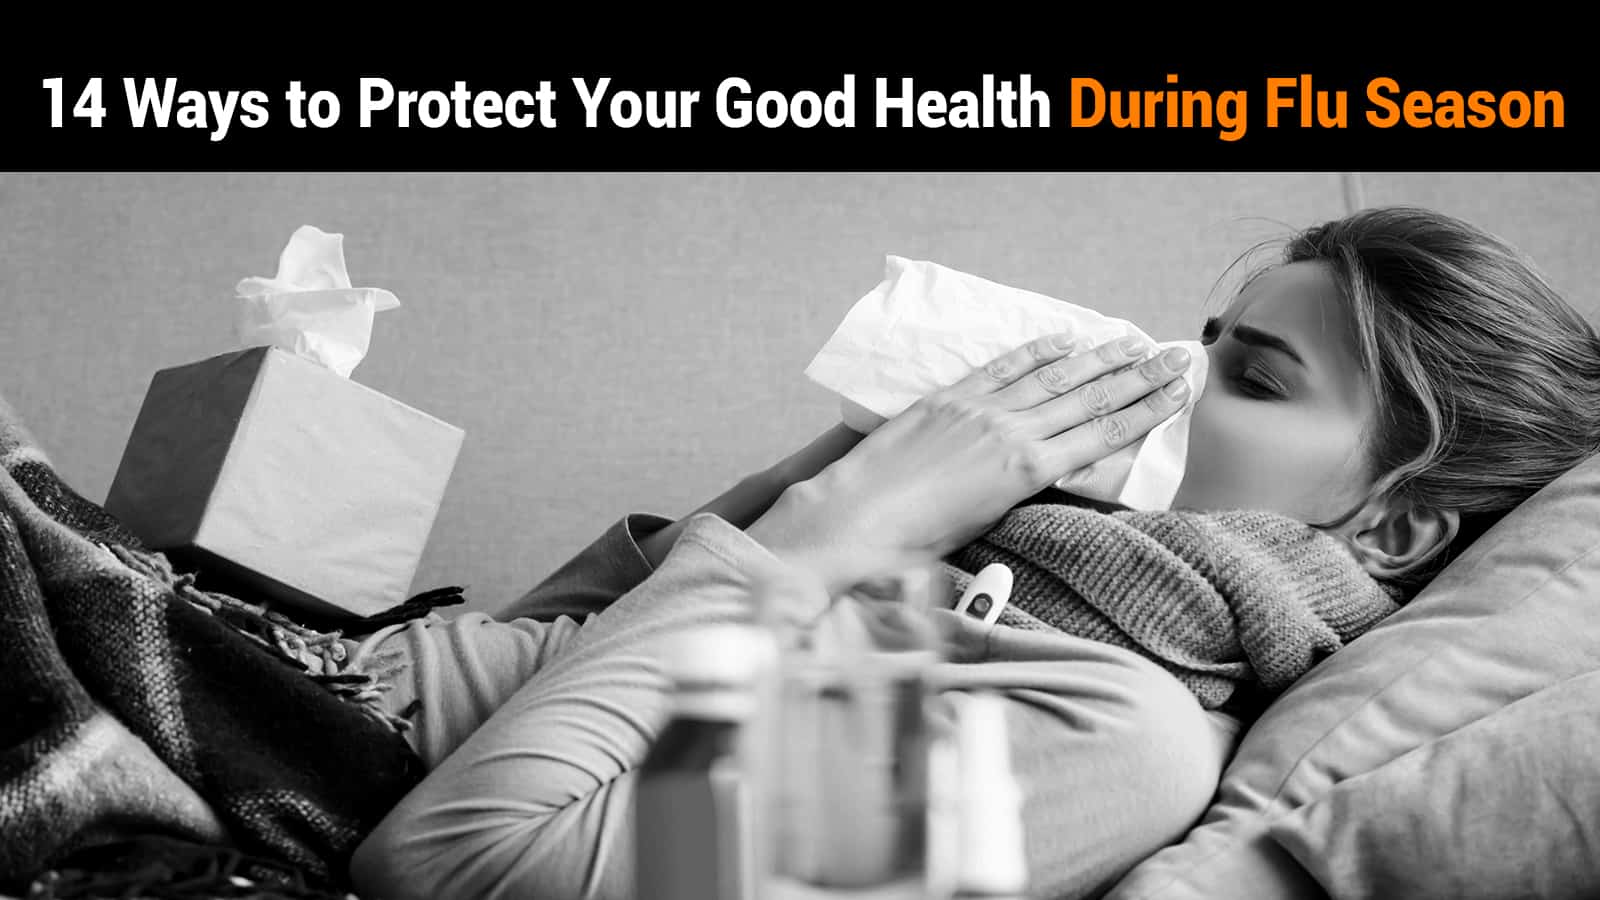 14 Ways to Protect Your Good Health During Flu Season